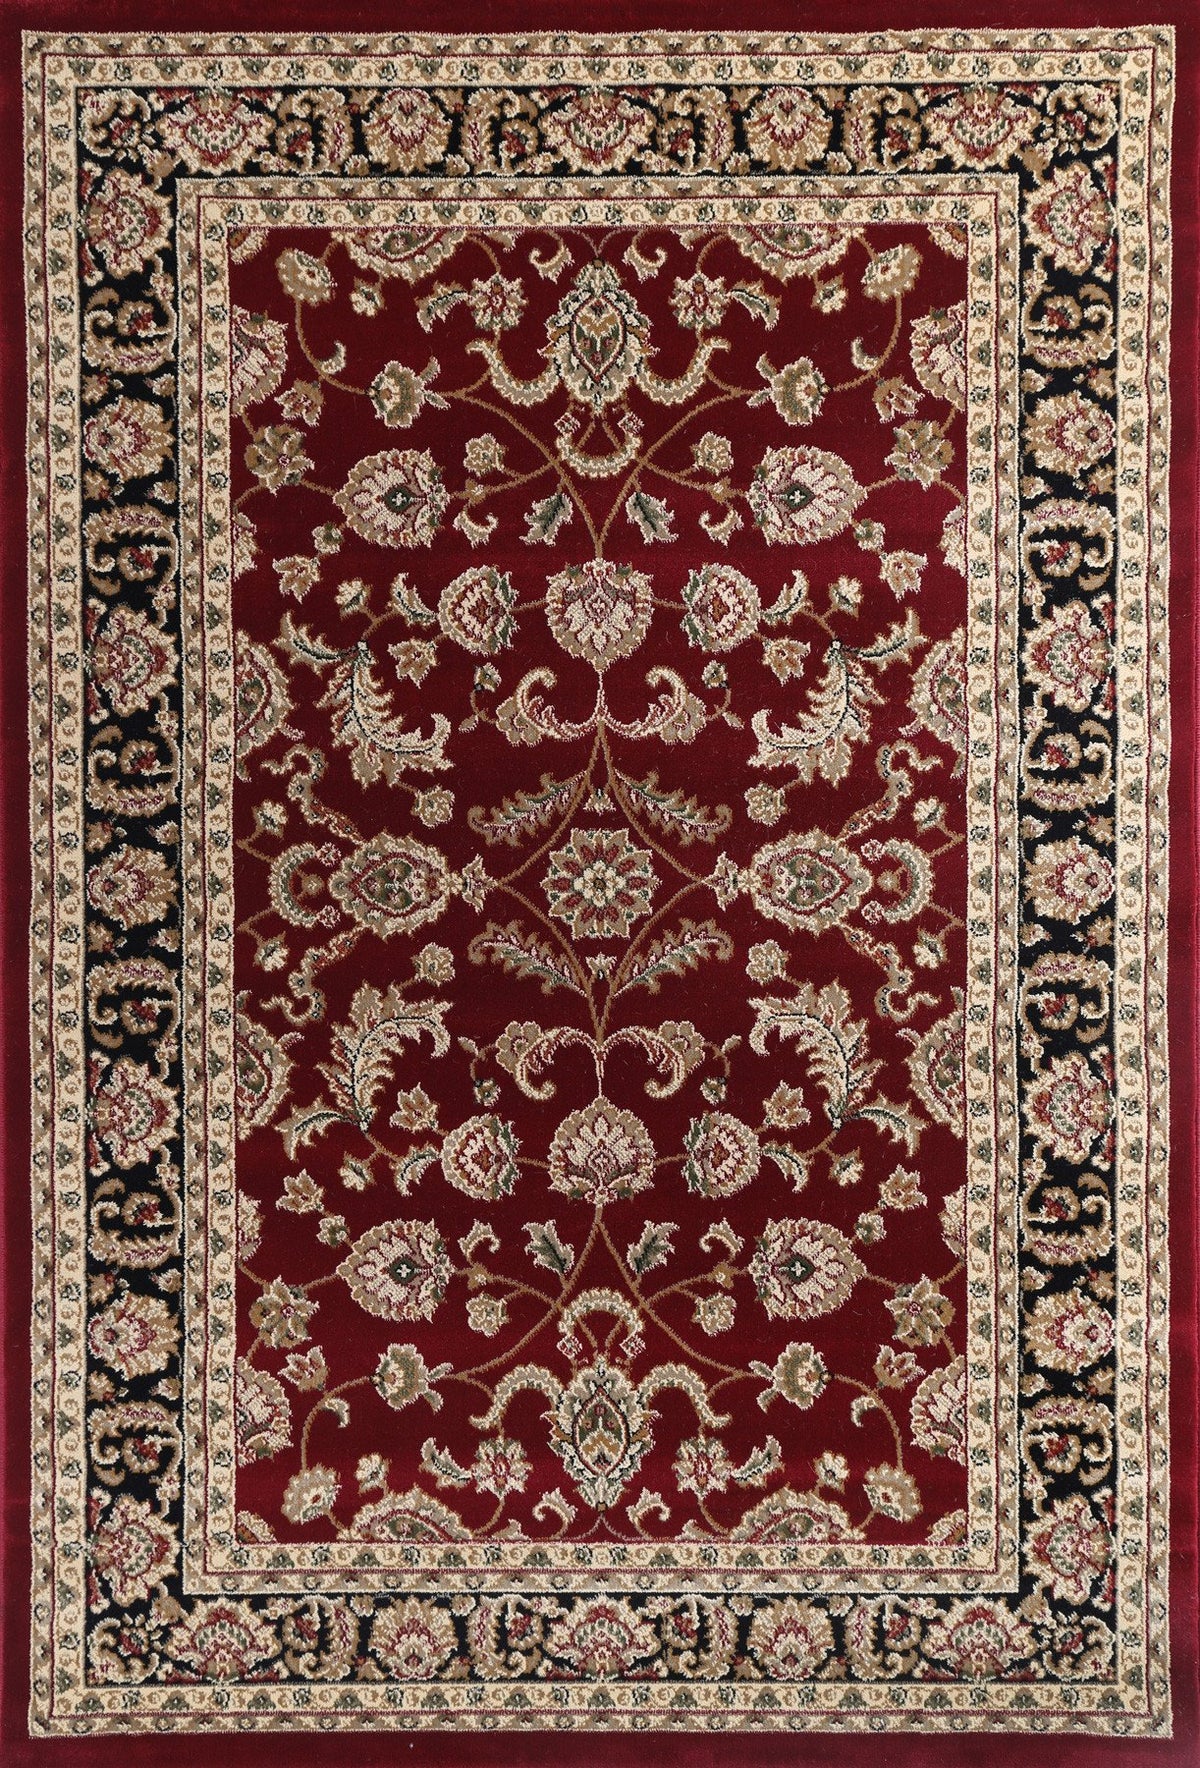 Ornate Red and Black Traditional Bordered Ikat Rug